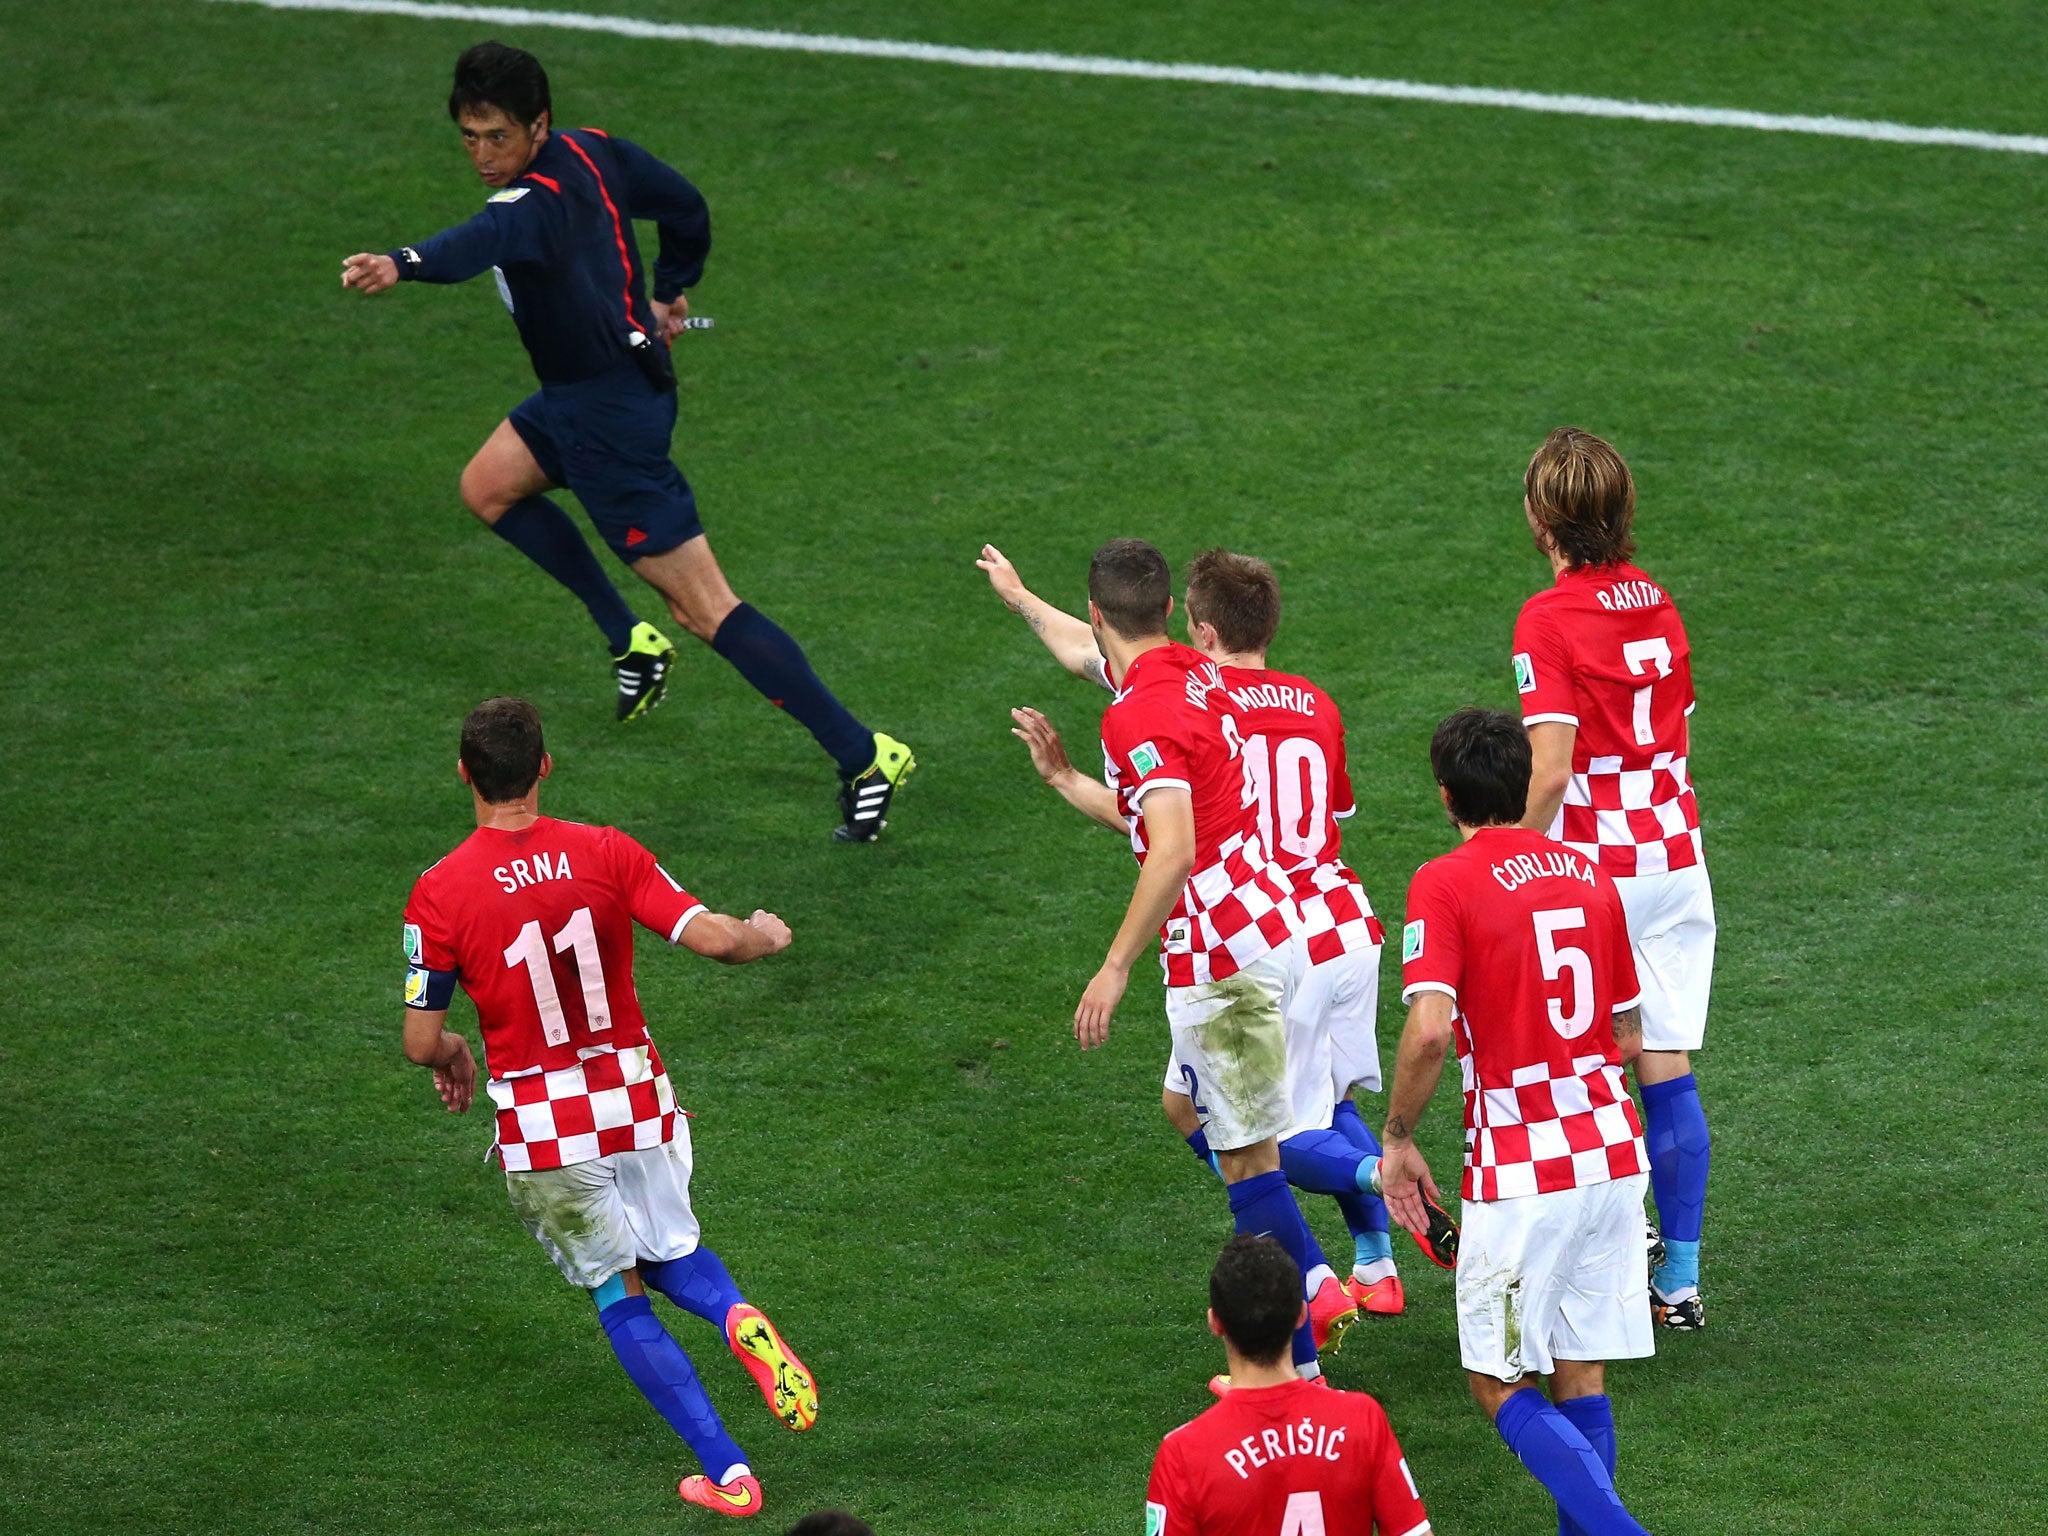 Croatian players chase Yuichi Nushima after he awards Brazil a controversial penalty